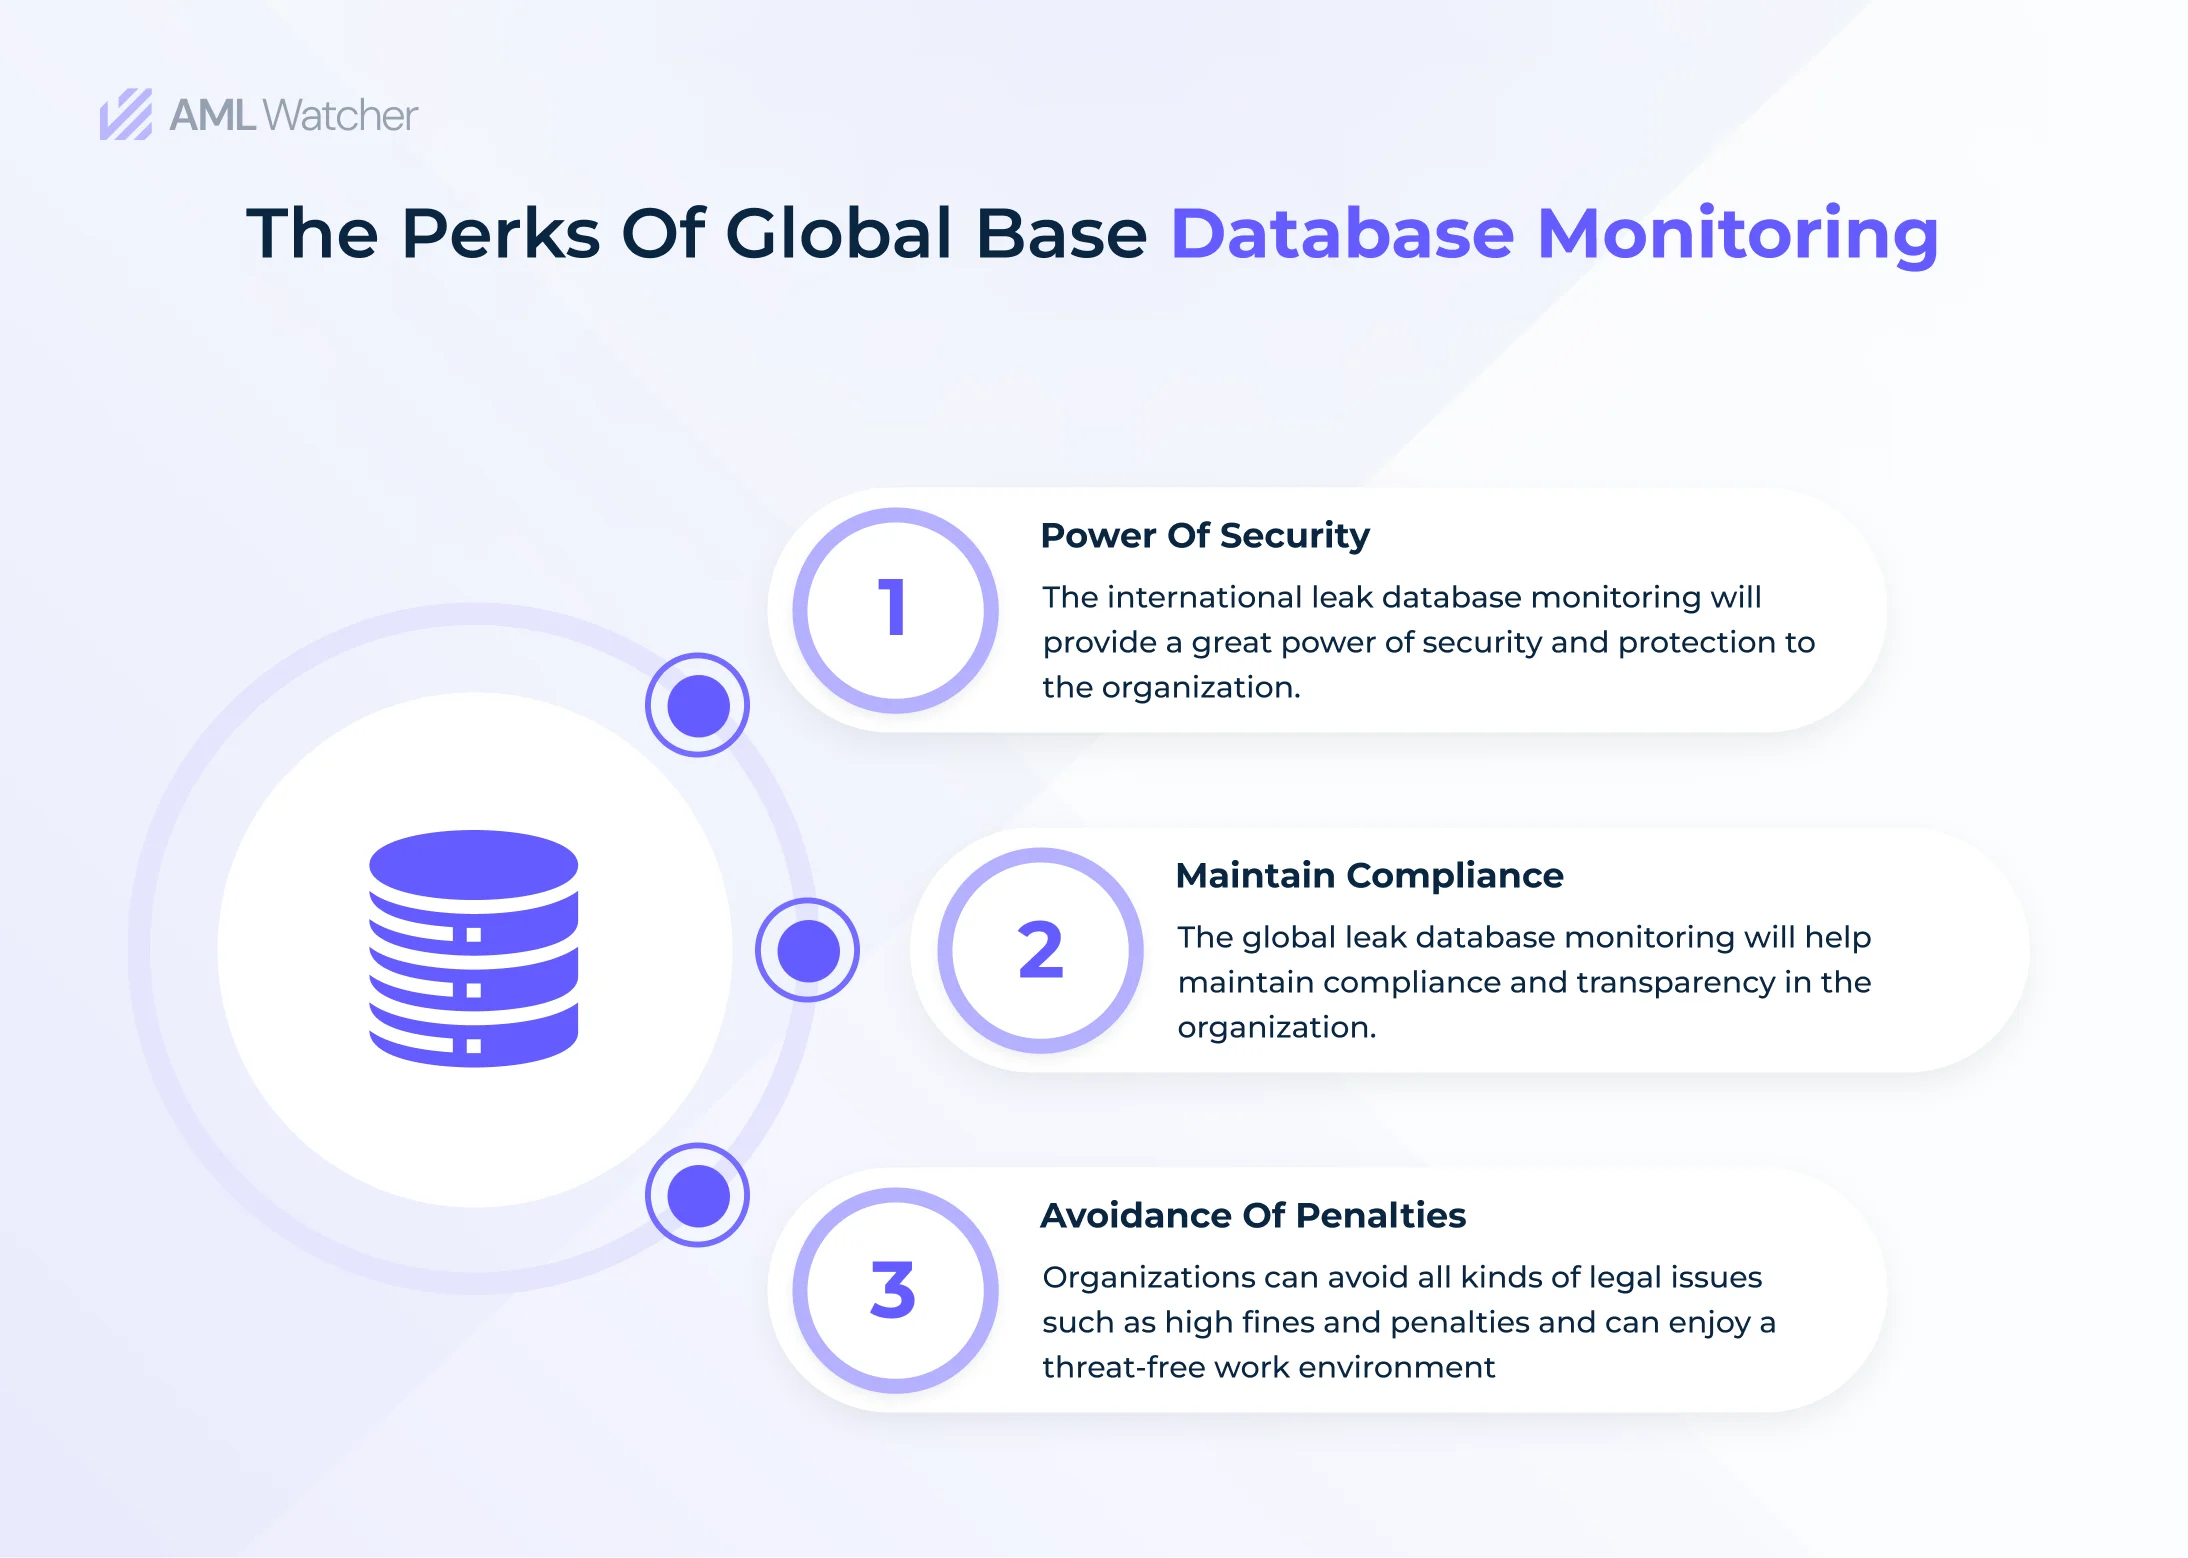 organizations can enjoy great benefits with International leaks database monitoring.